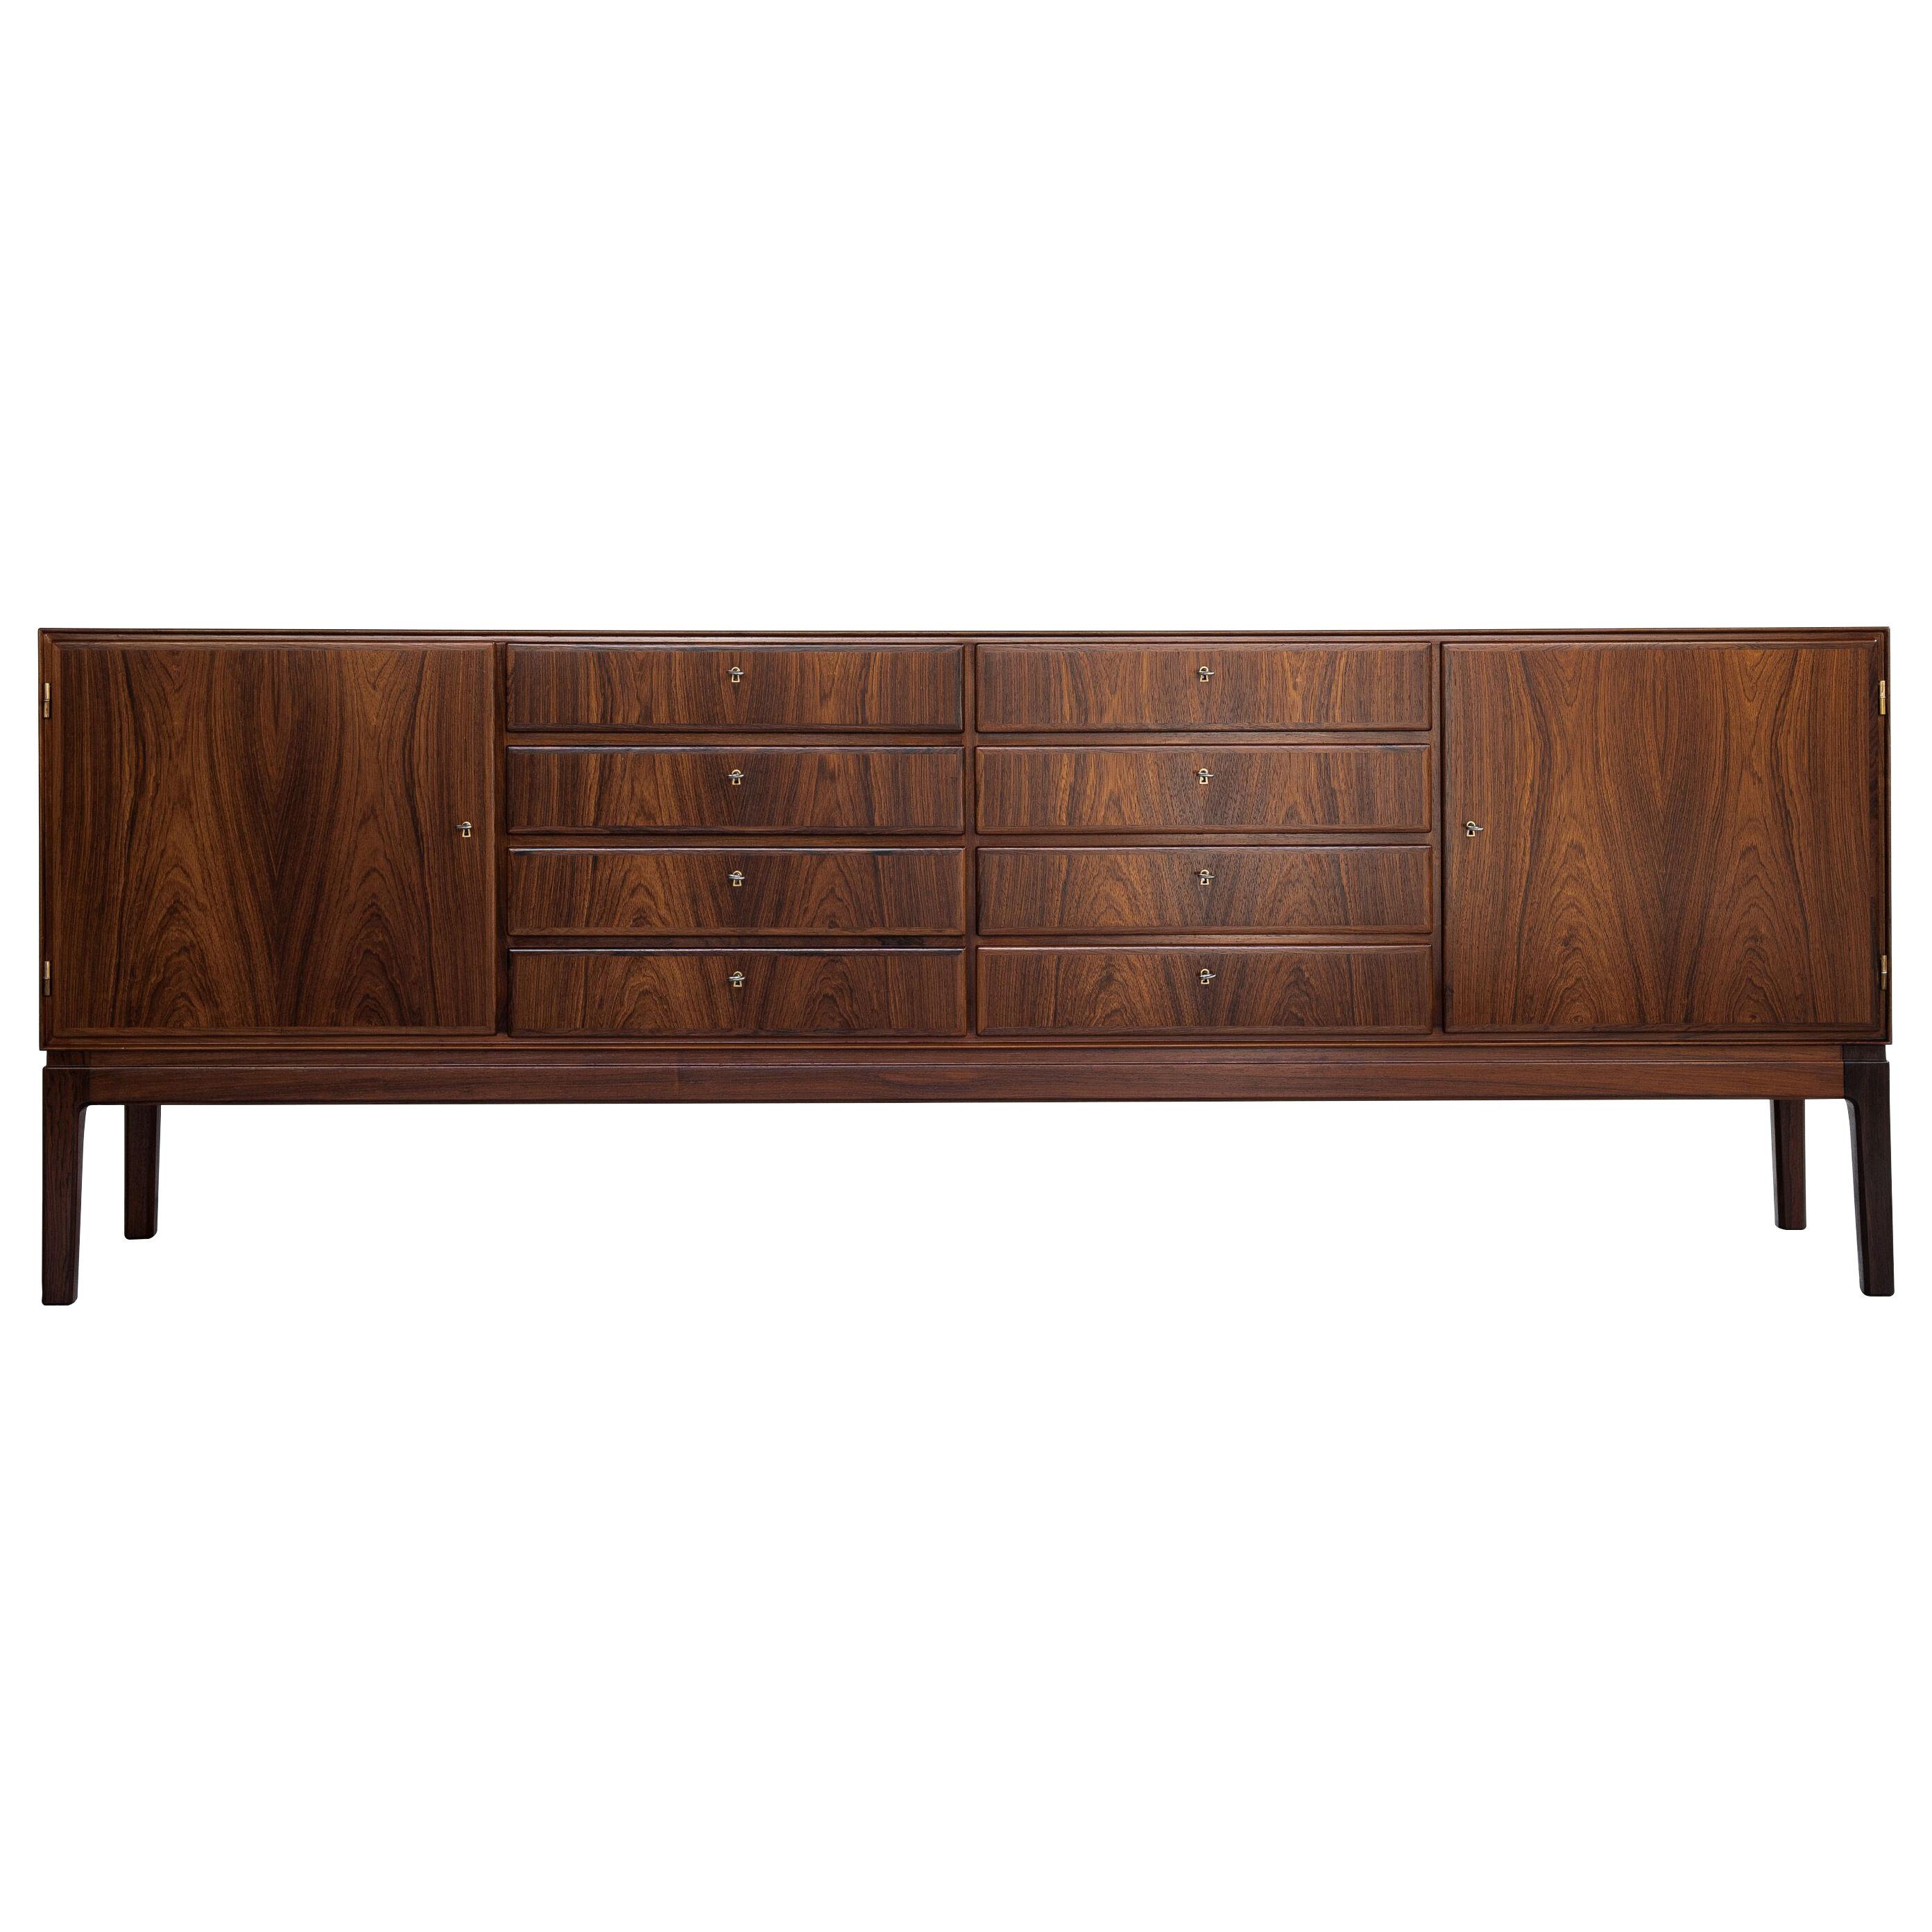 Midcentury Danish sideboard in rosewood by Ole Wanscher 1960s